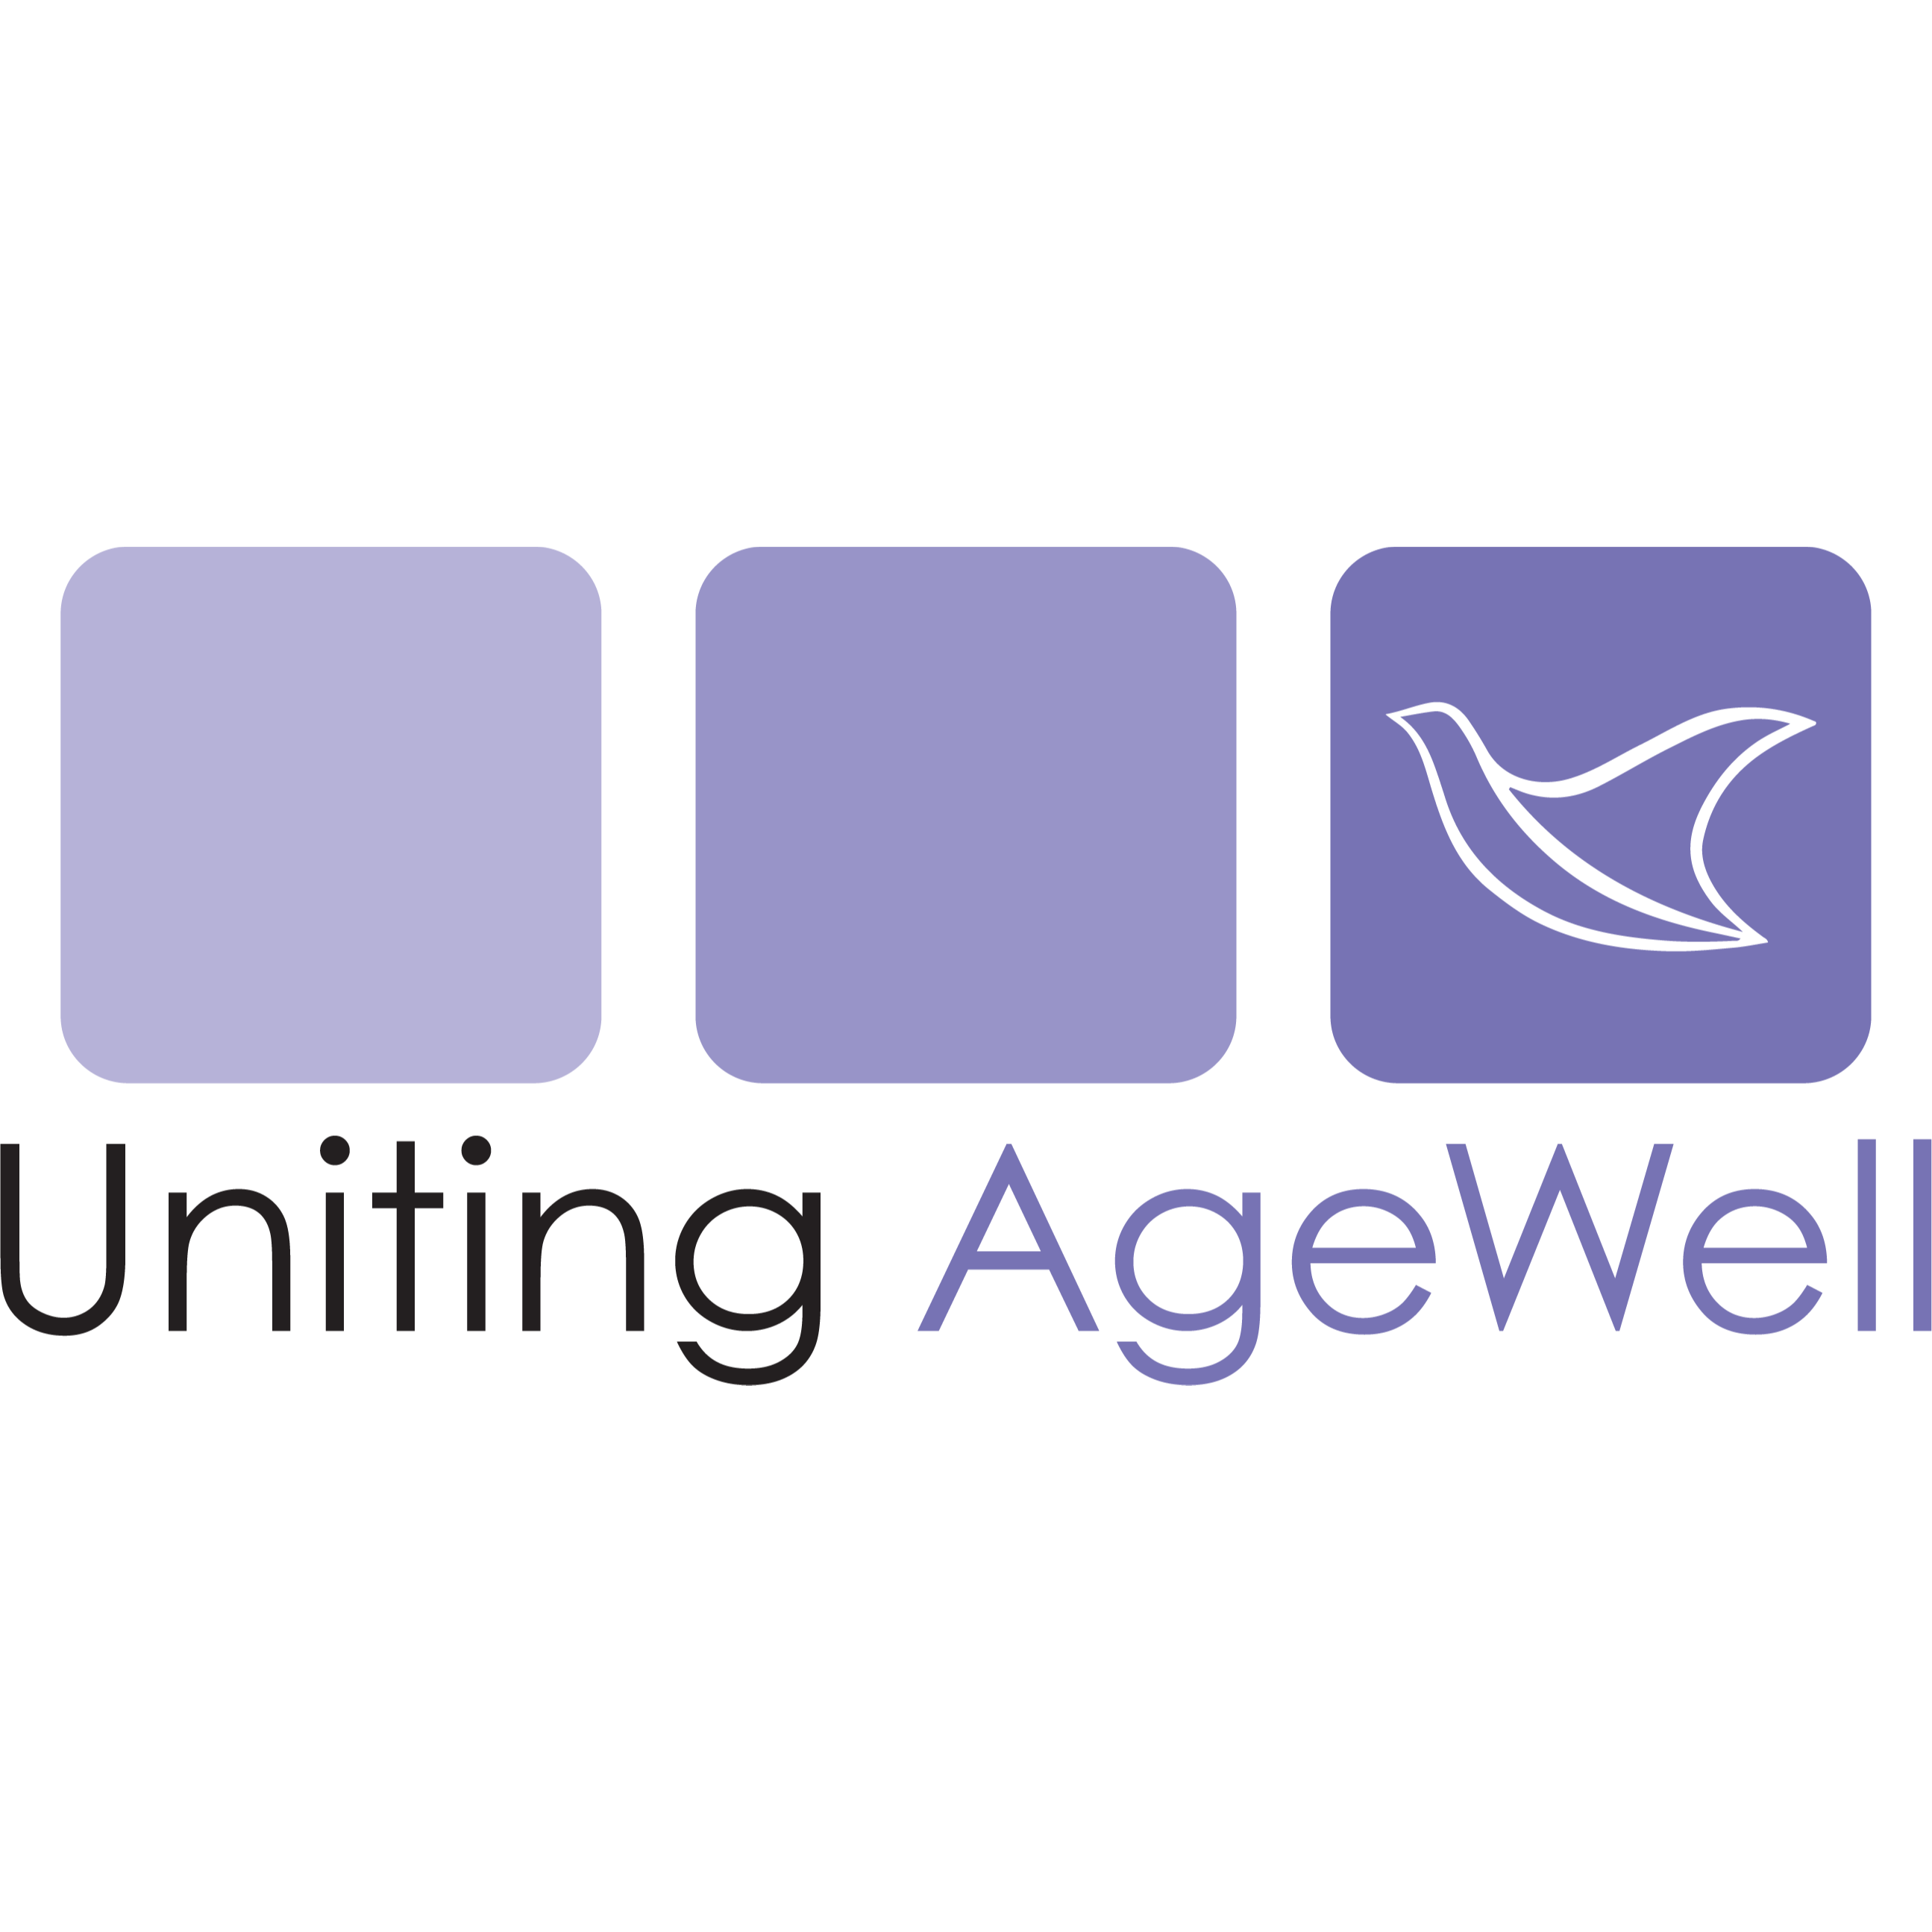 Uniting AgeWell Andrew Kerr Care Community - Mornington, VIC 3931 - (03) 5975 6334 | ShowMeLocal.com